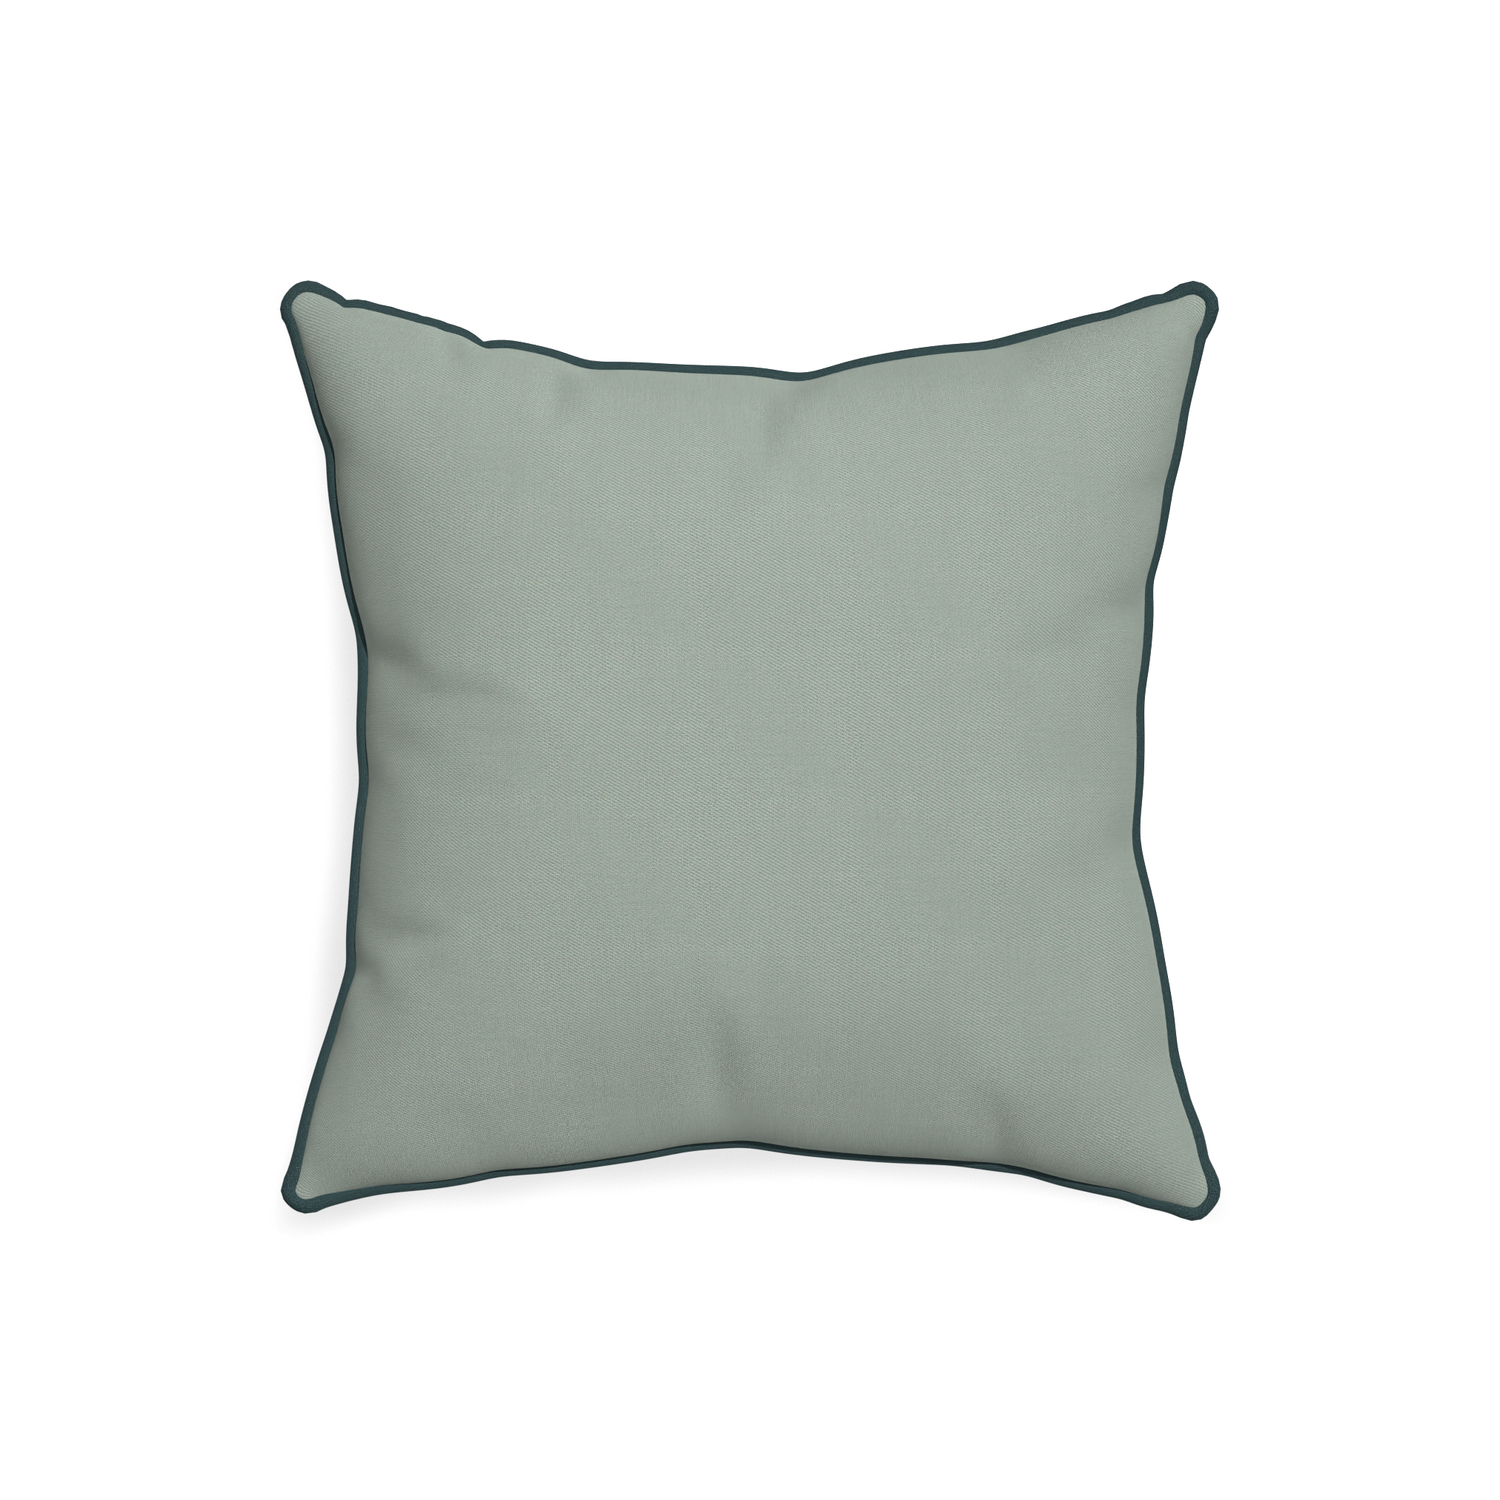 20-square sage custom sage green cottonpillow with p piping on white background